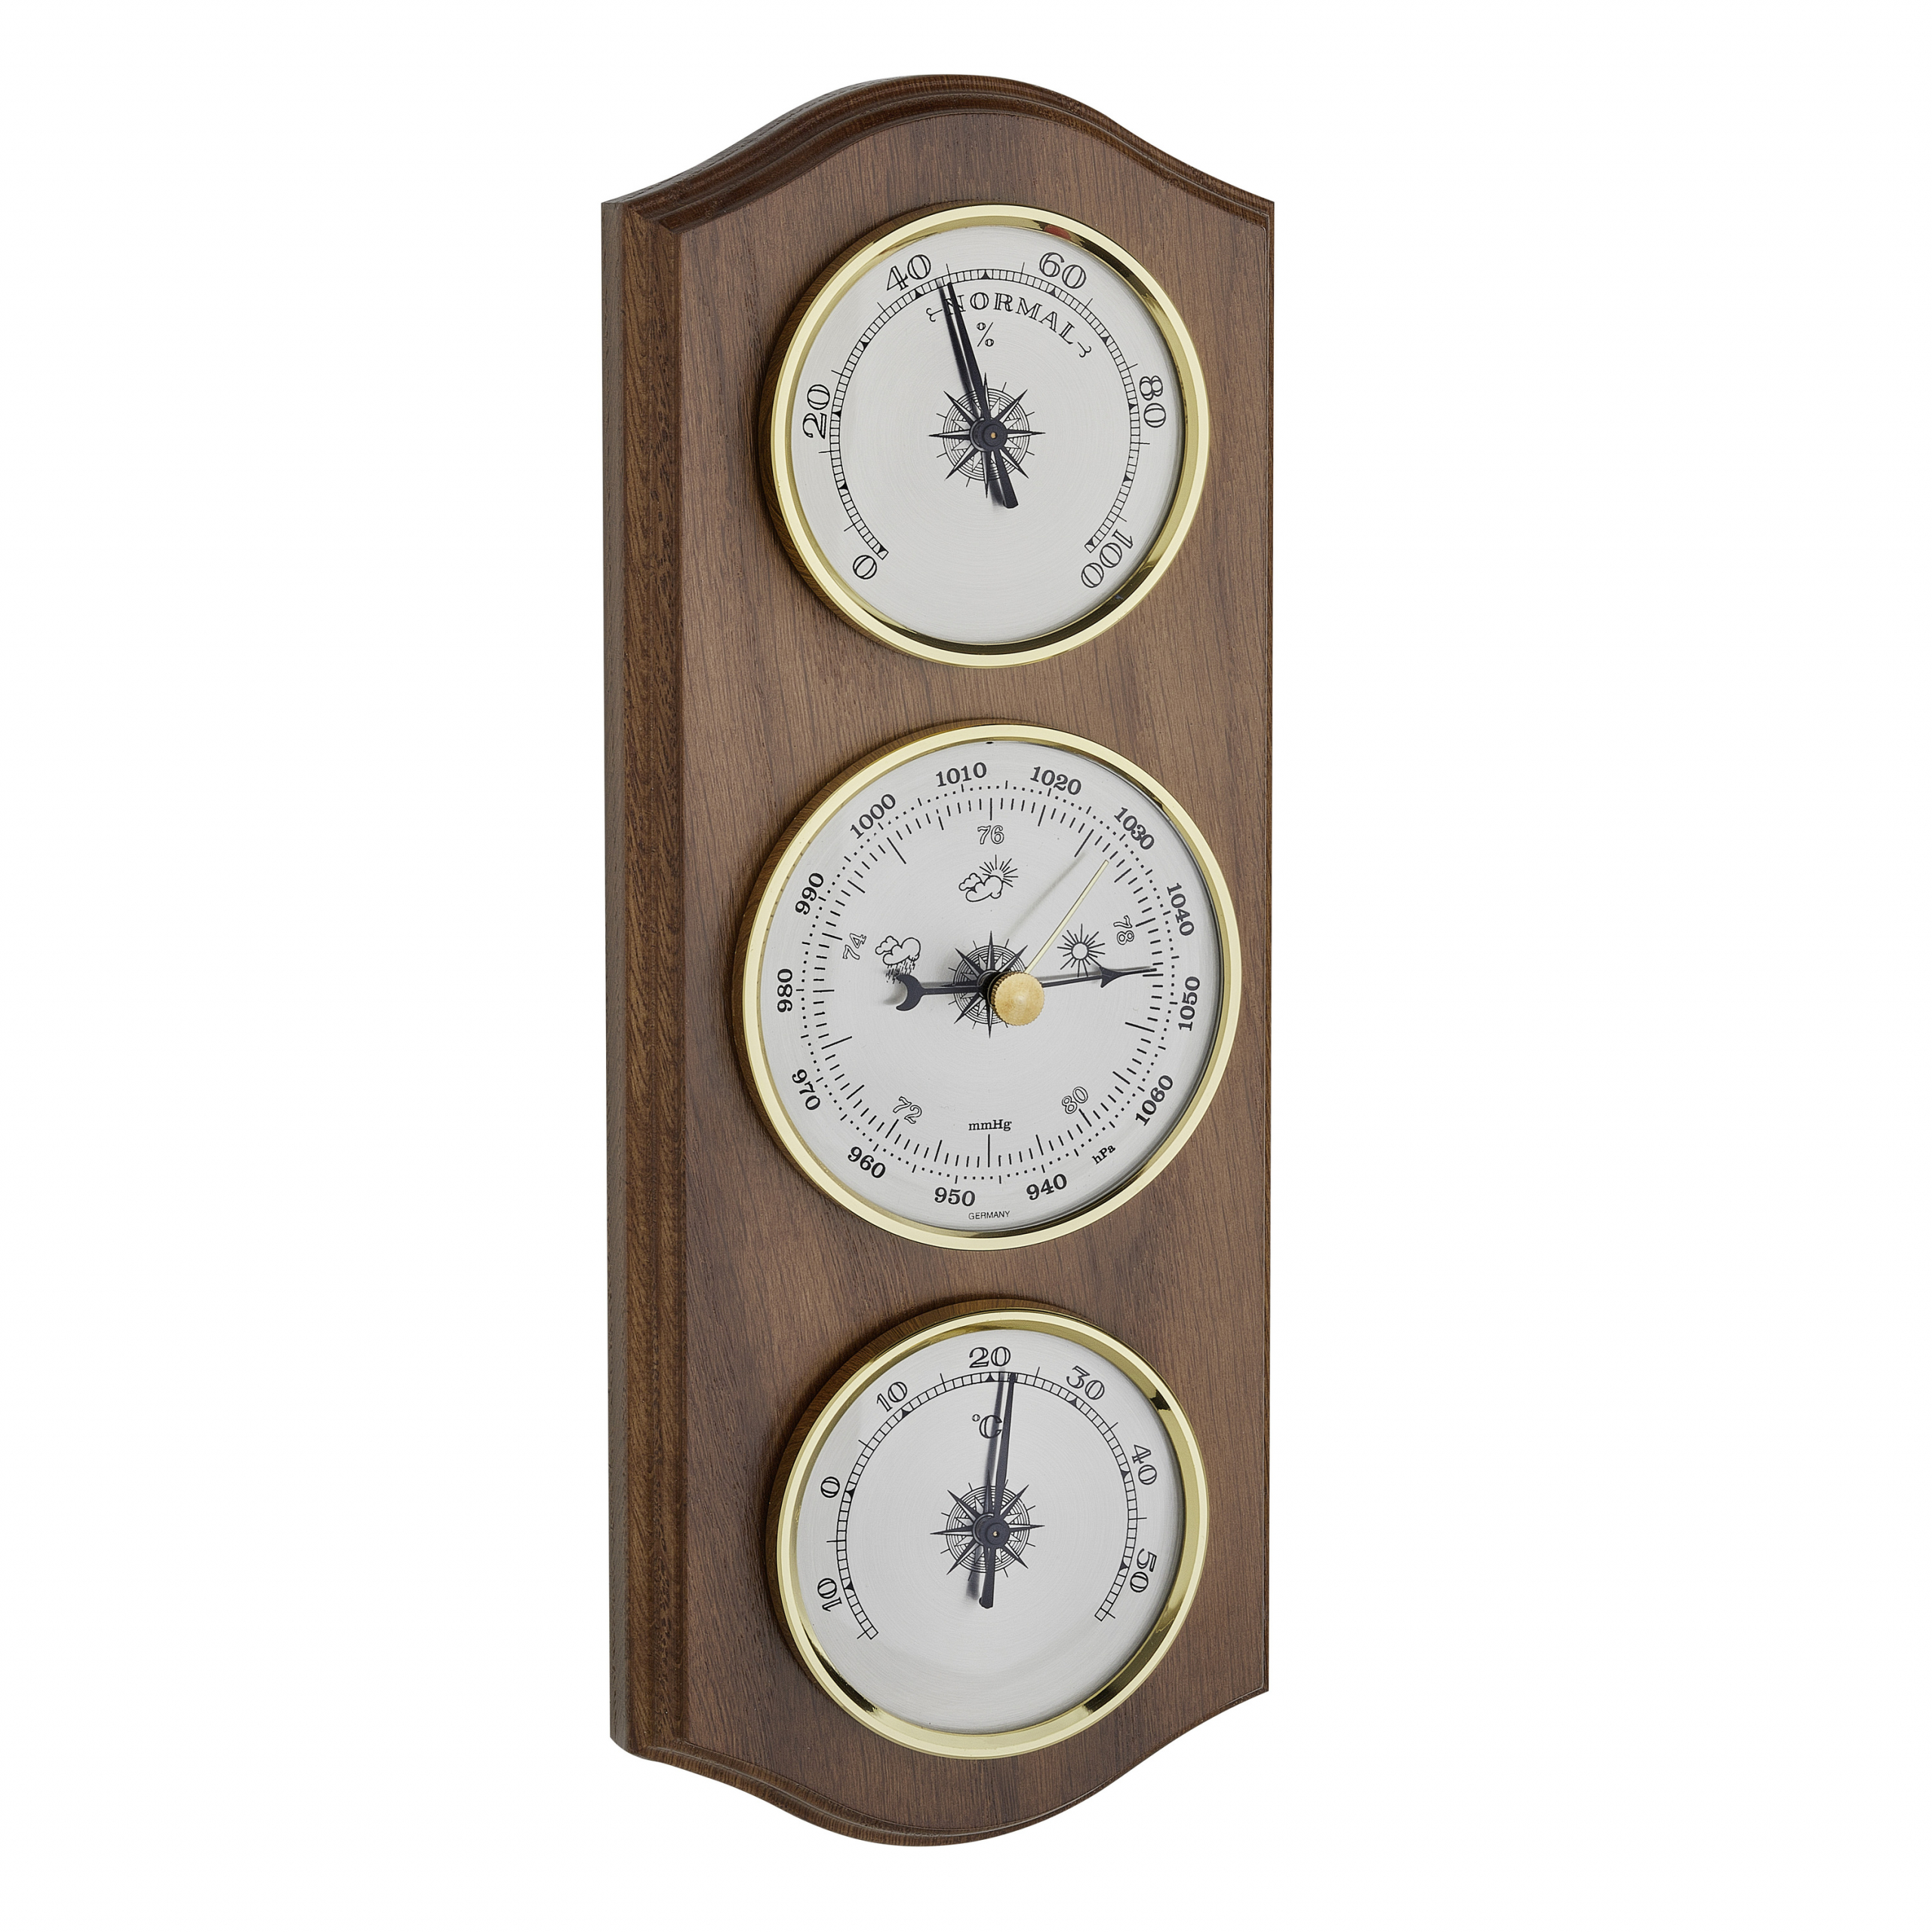 Analogue weather station made of solid wood